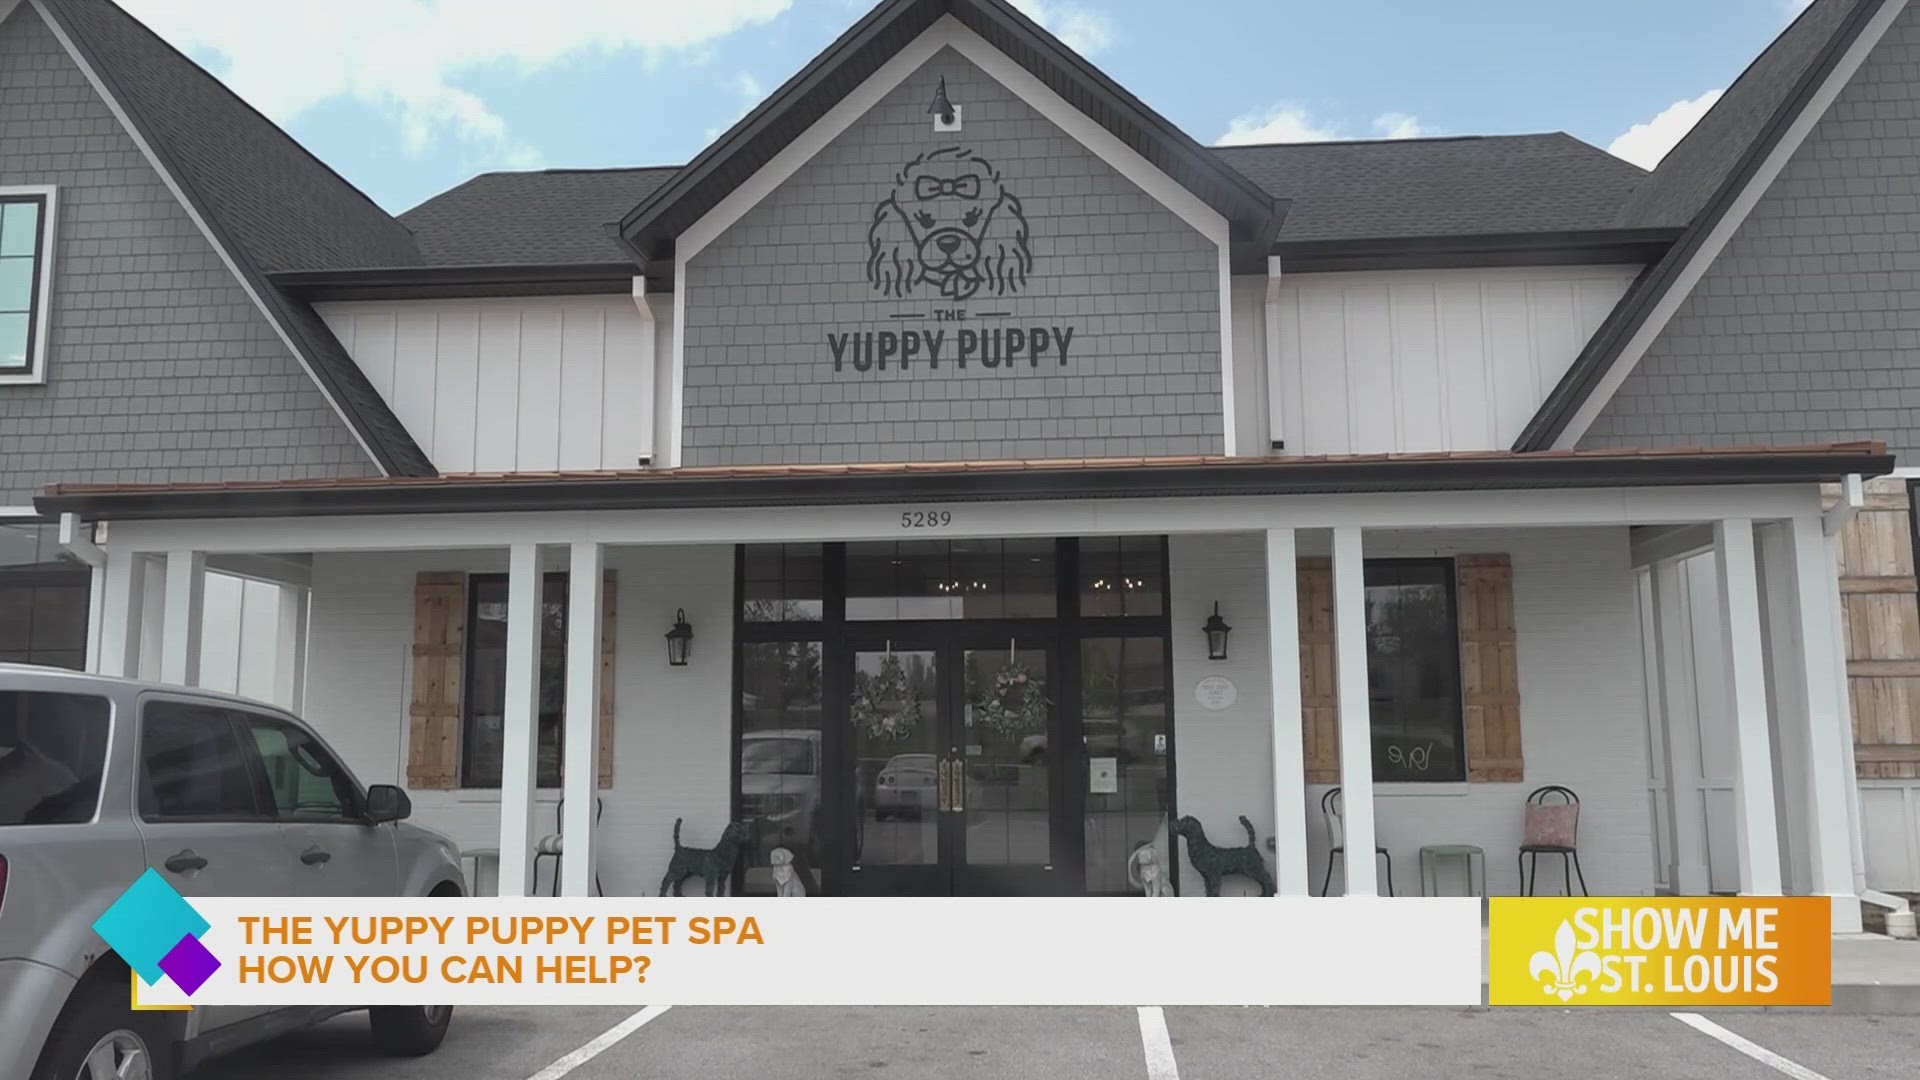 Yuppy Puppy's non-profit has stepped up to the plate and need your help to continue its mission.